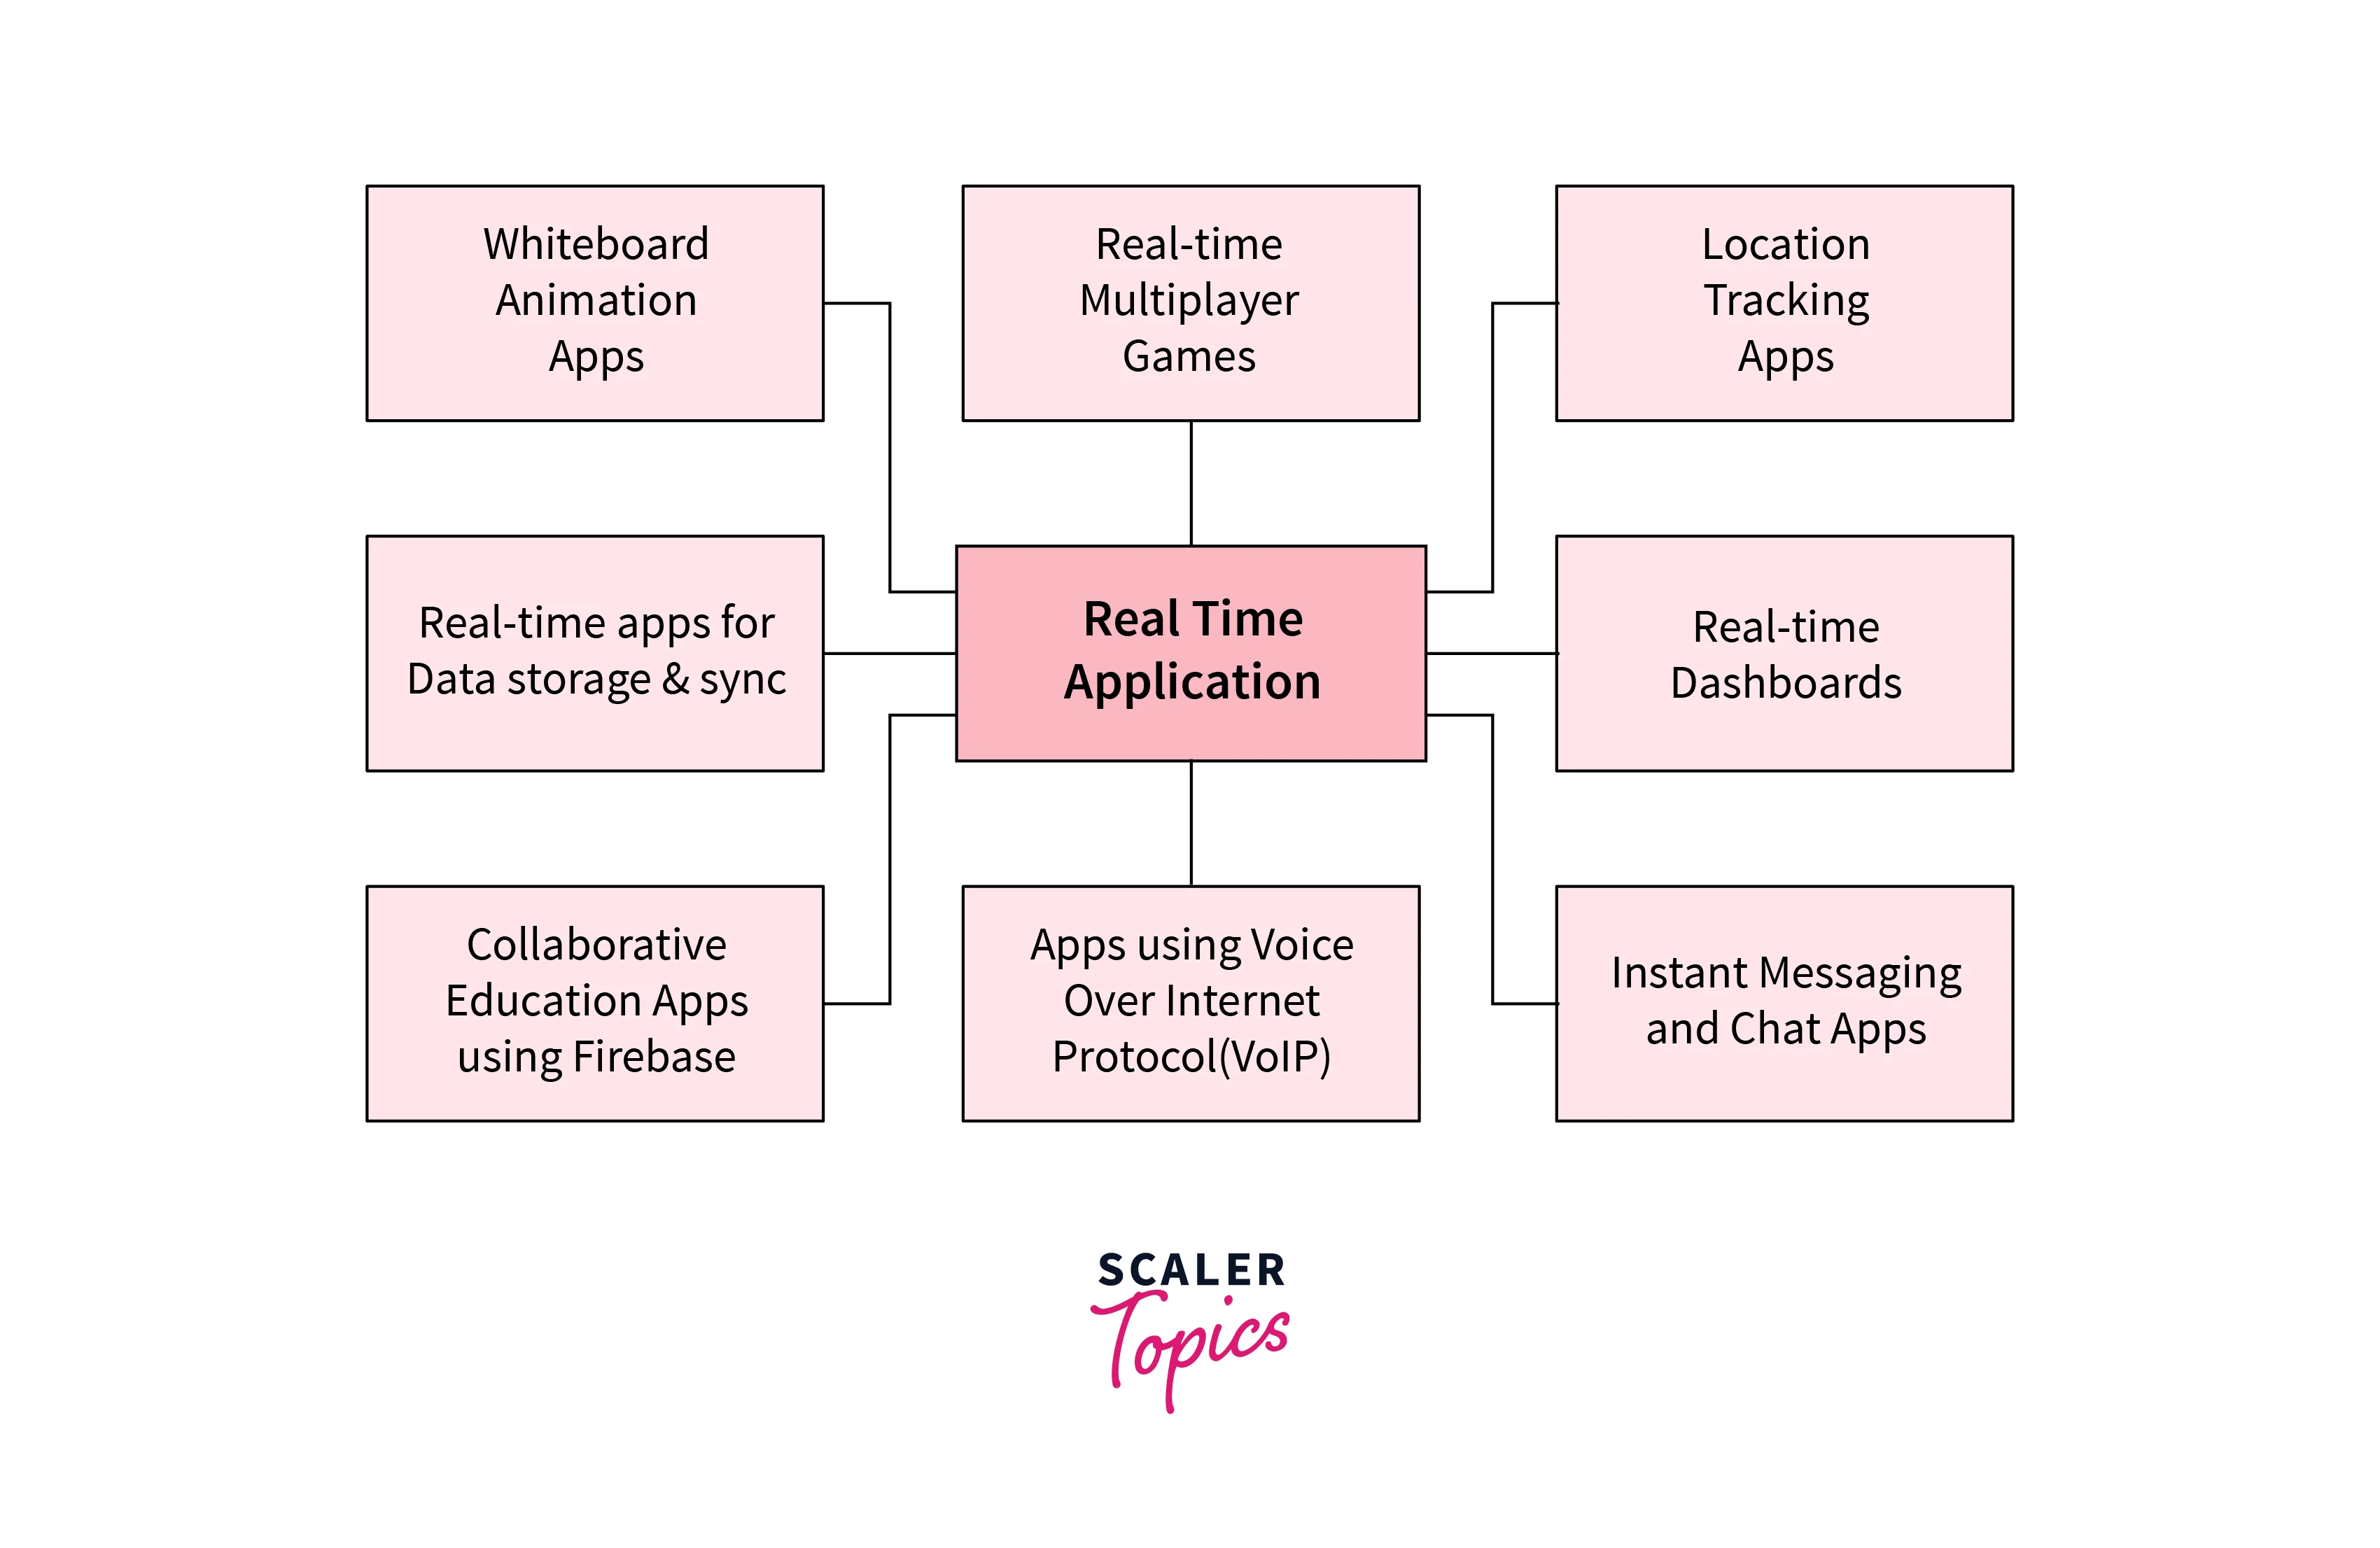 Examples of Real-Time applications